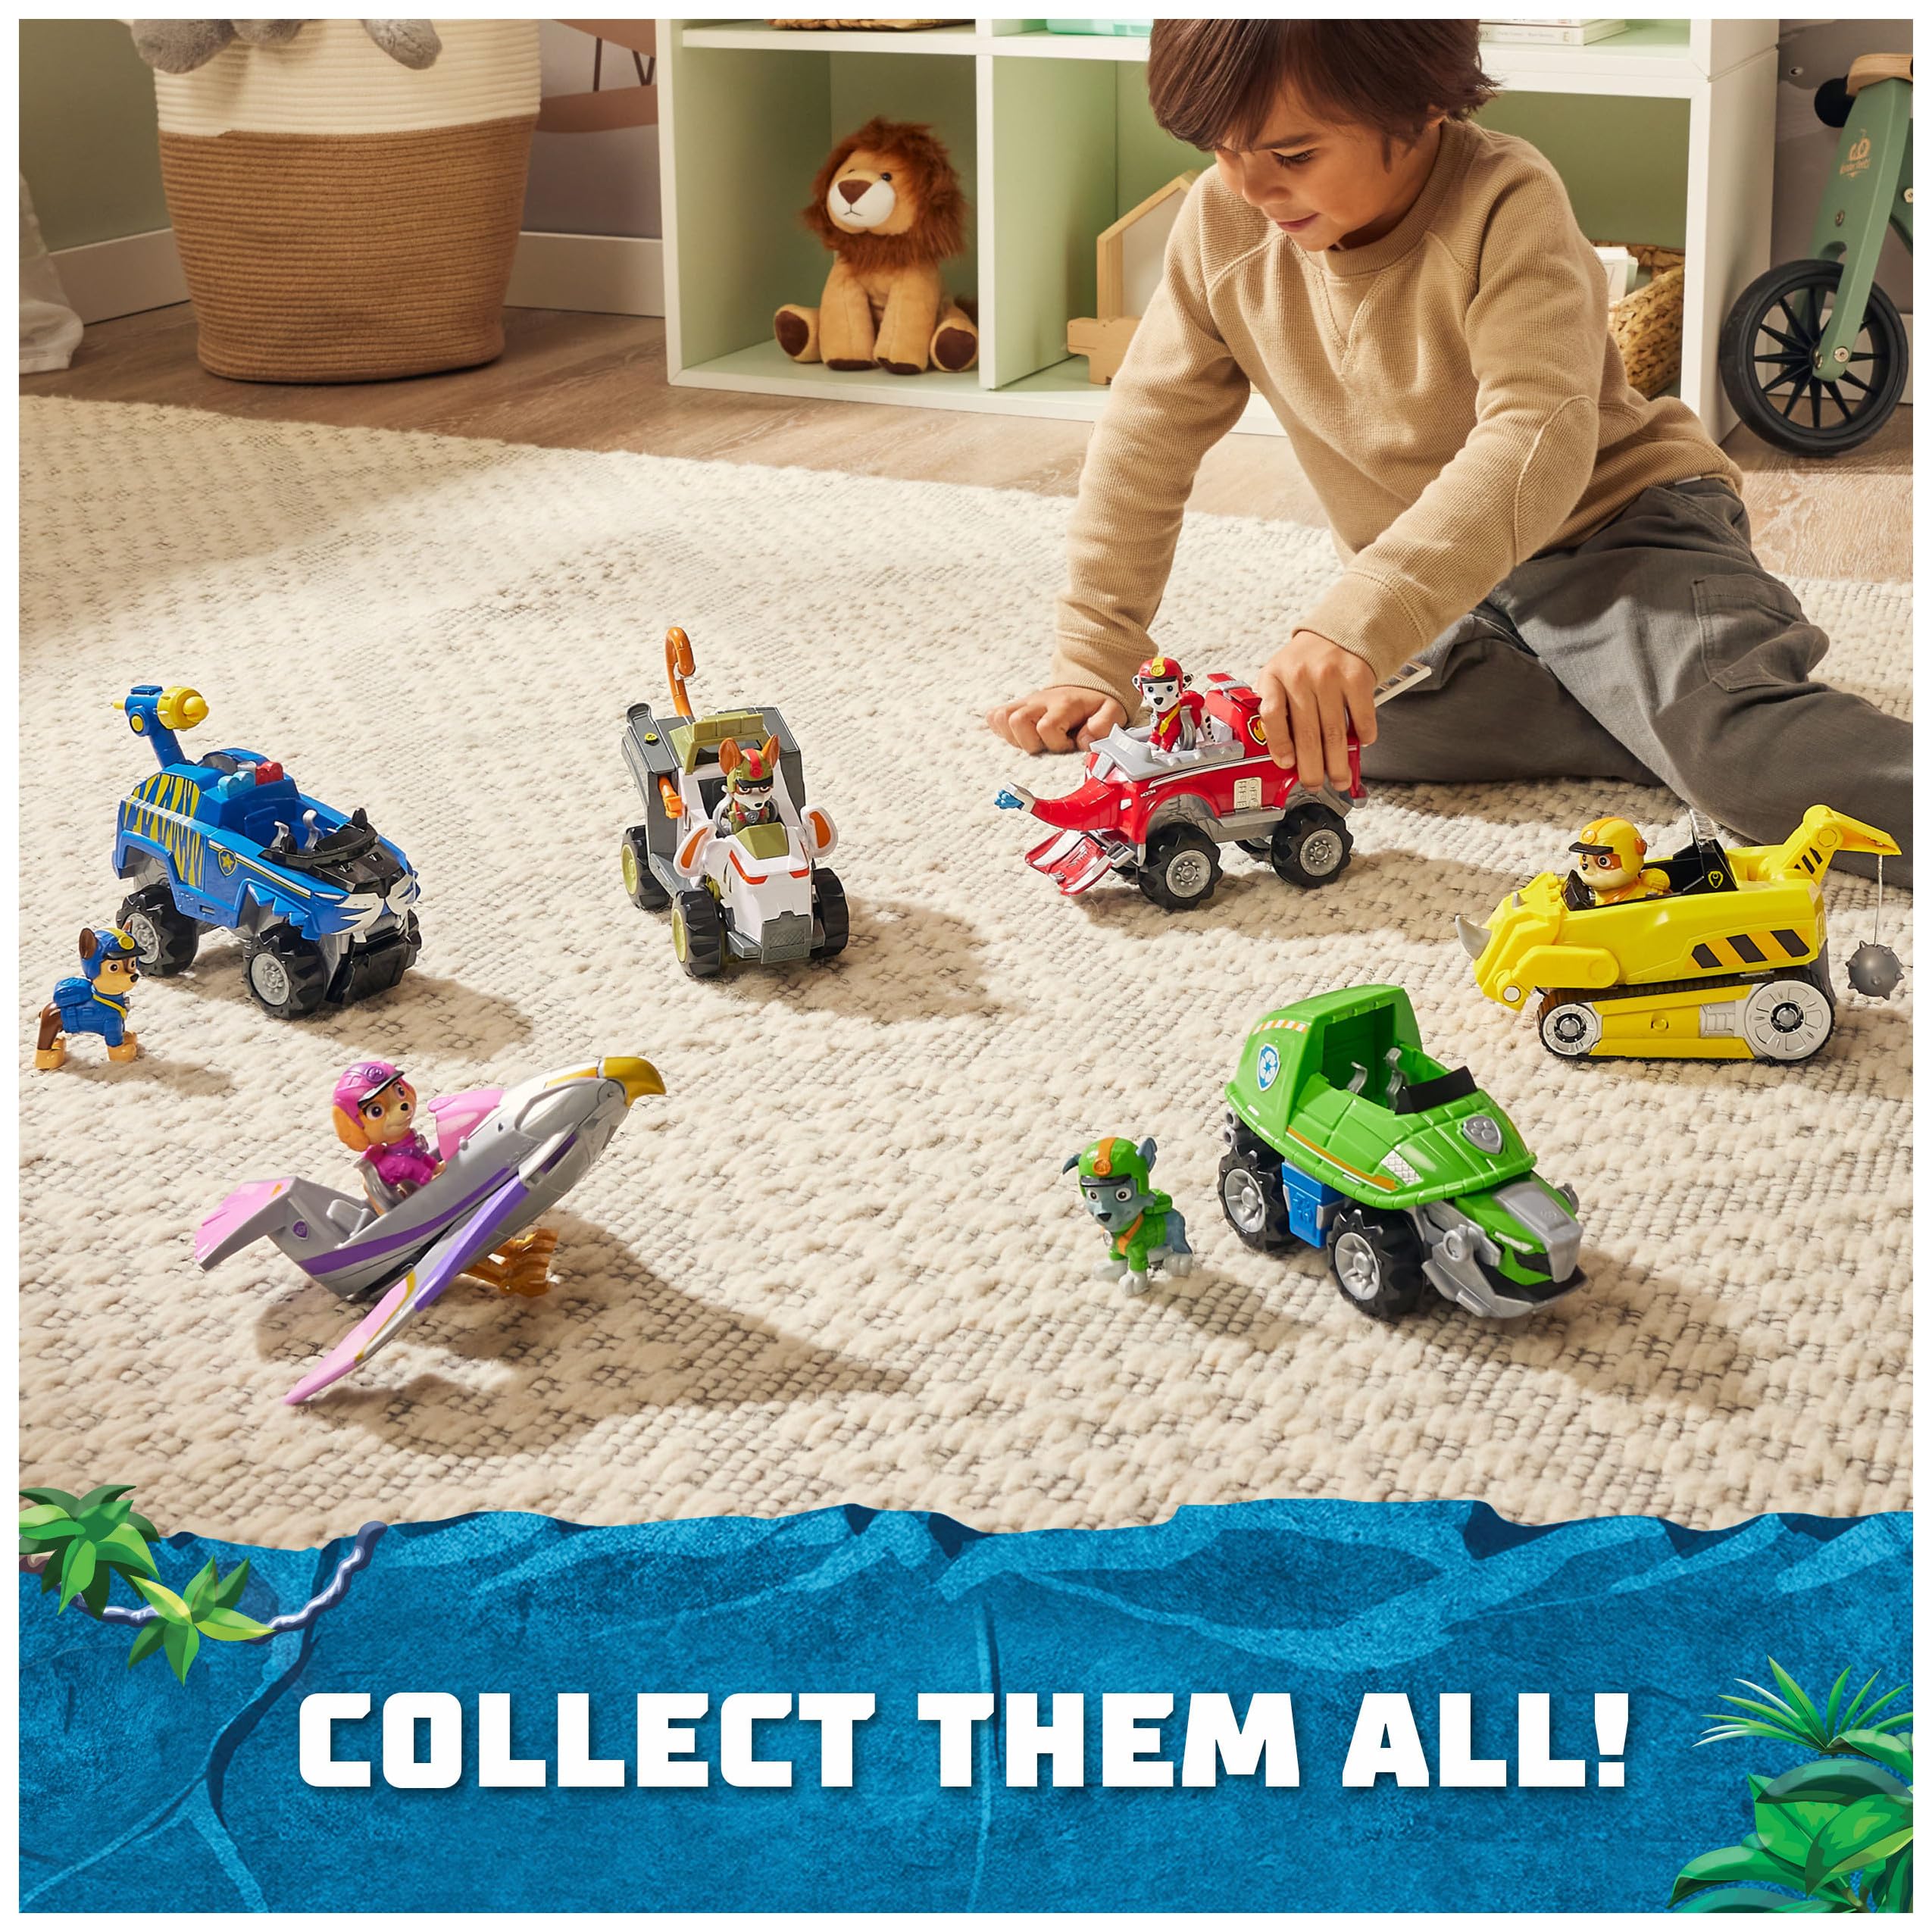 Paw Patrol Jungle Pups, Chase Tiger Vehicle, Toy Truck with Collectible Action Figure, Kids Toys for Boys & Girls Ages 3 and Up